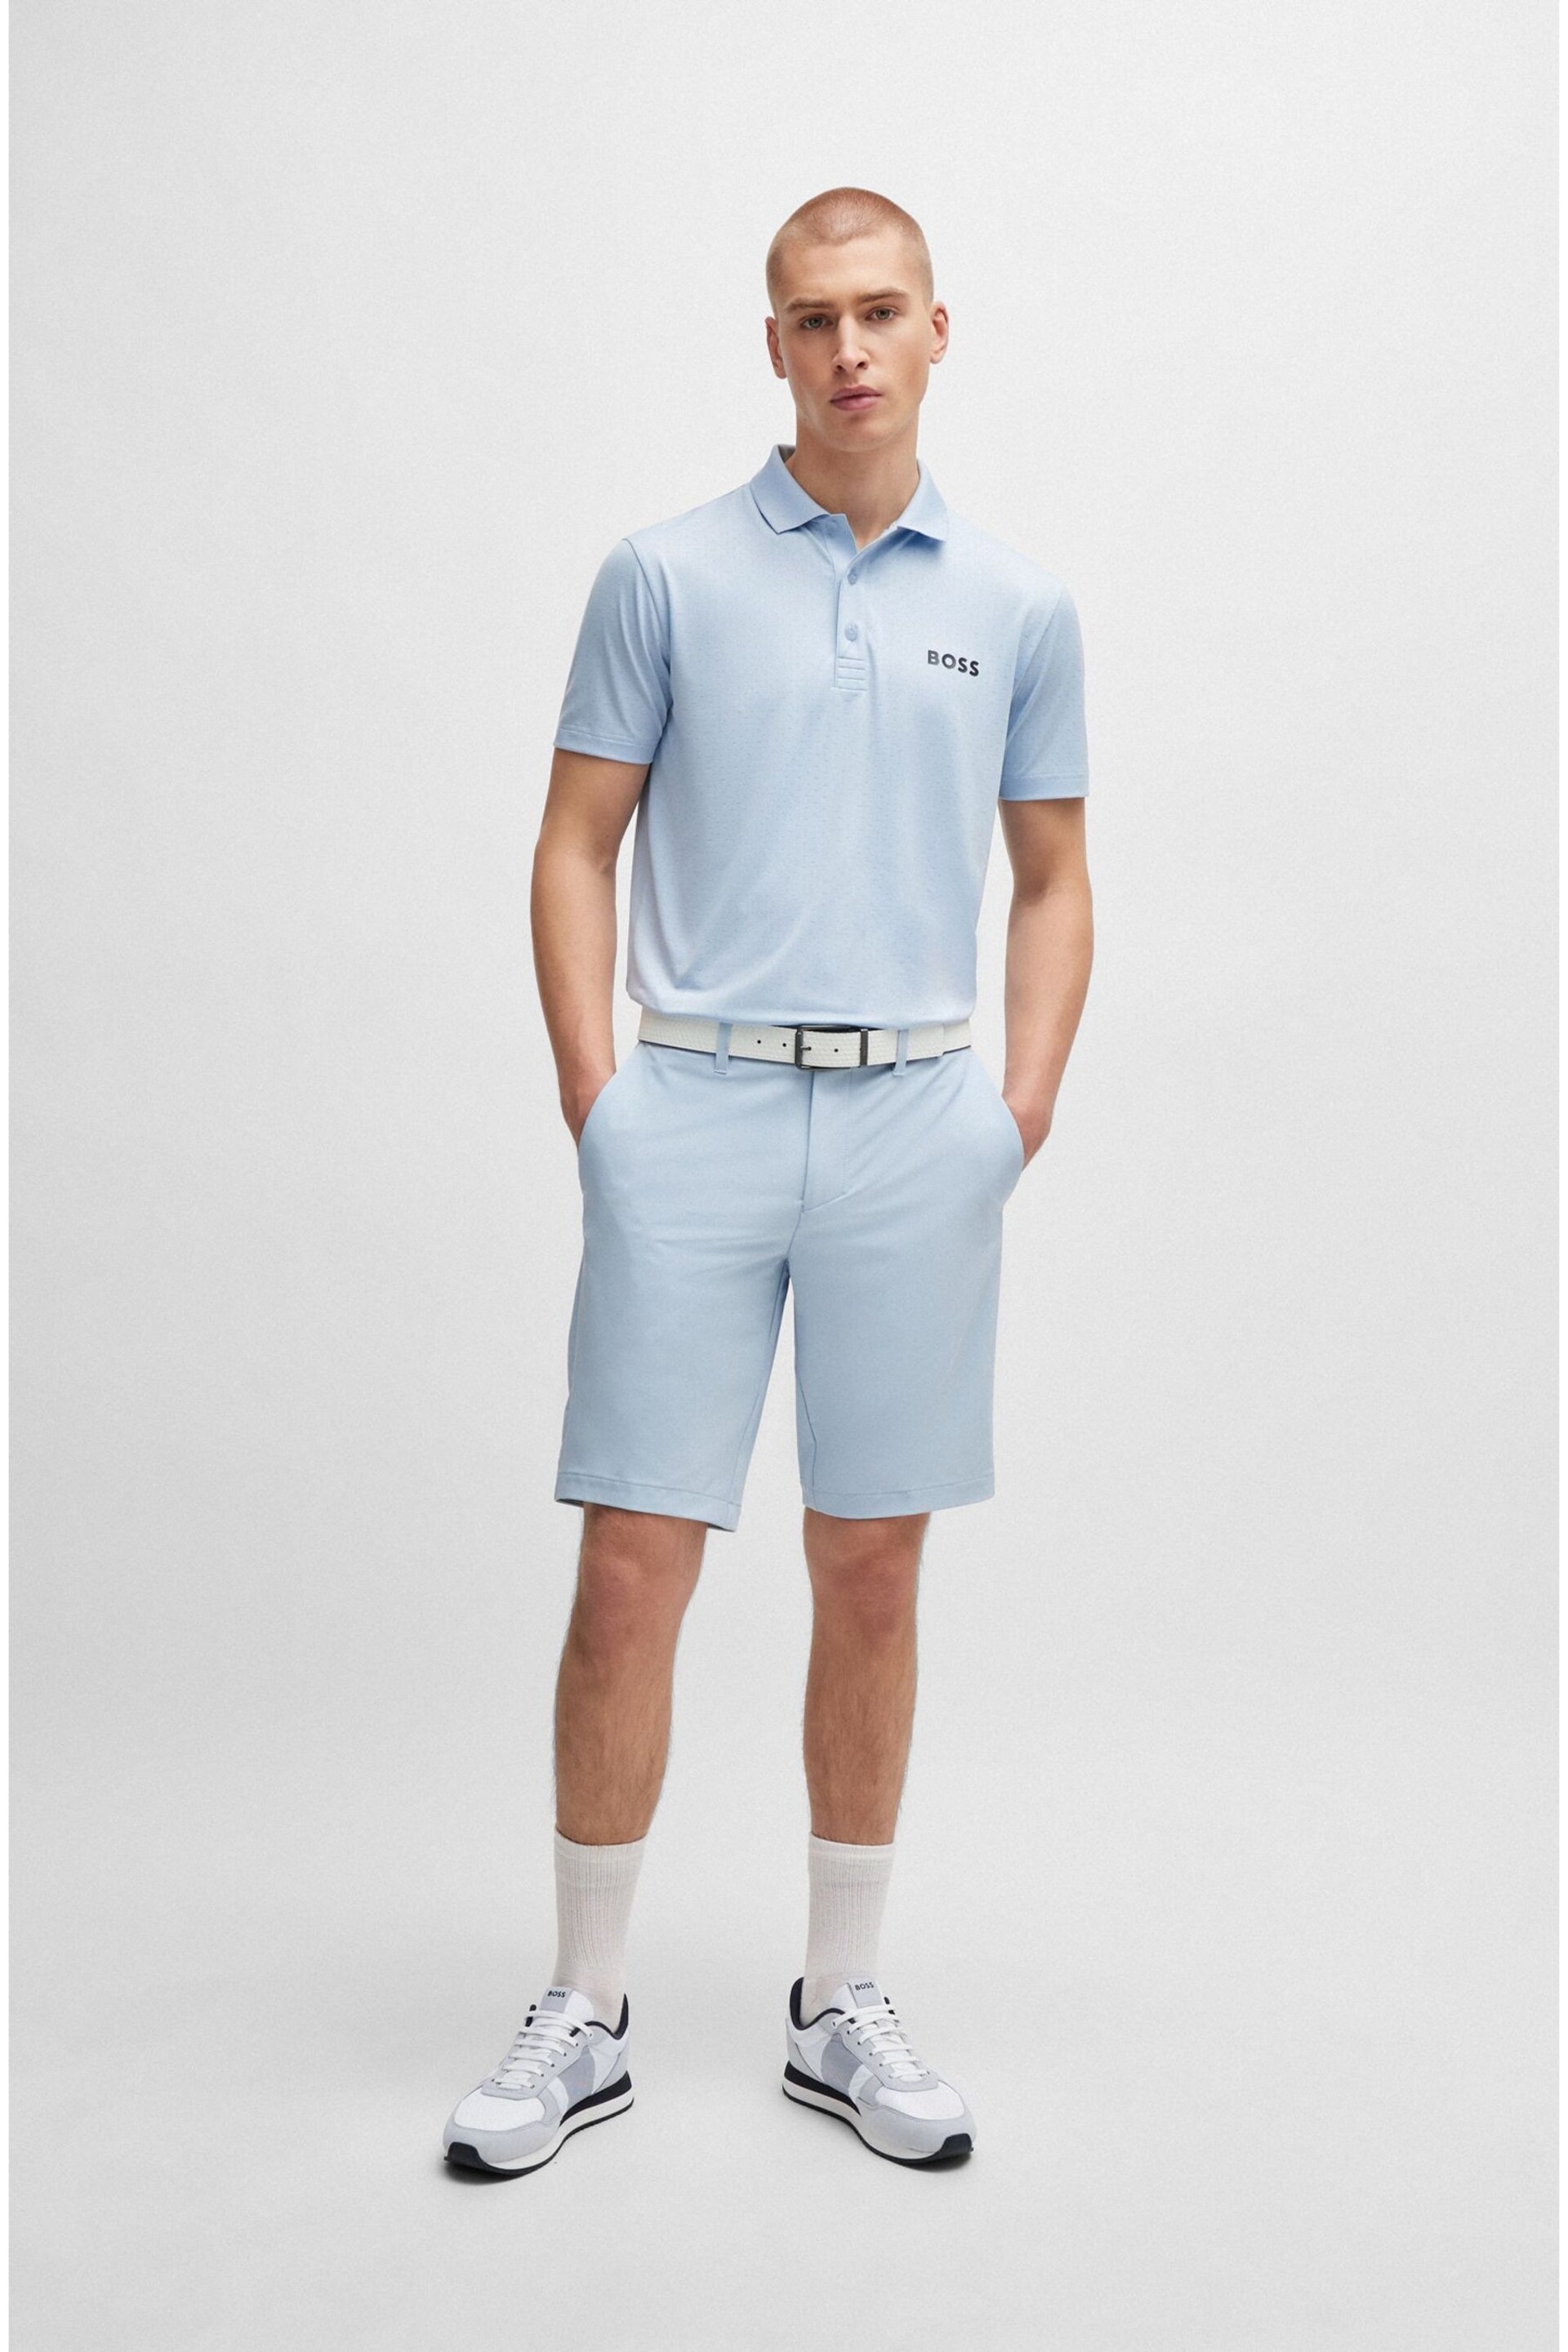 BOSS Light Blue Slim-Fit Shorts in Water-Repellent Easy-Iron Fabric - Image 3 of 5